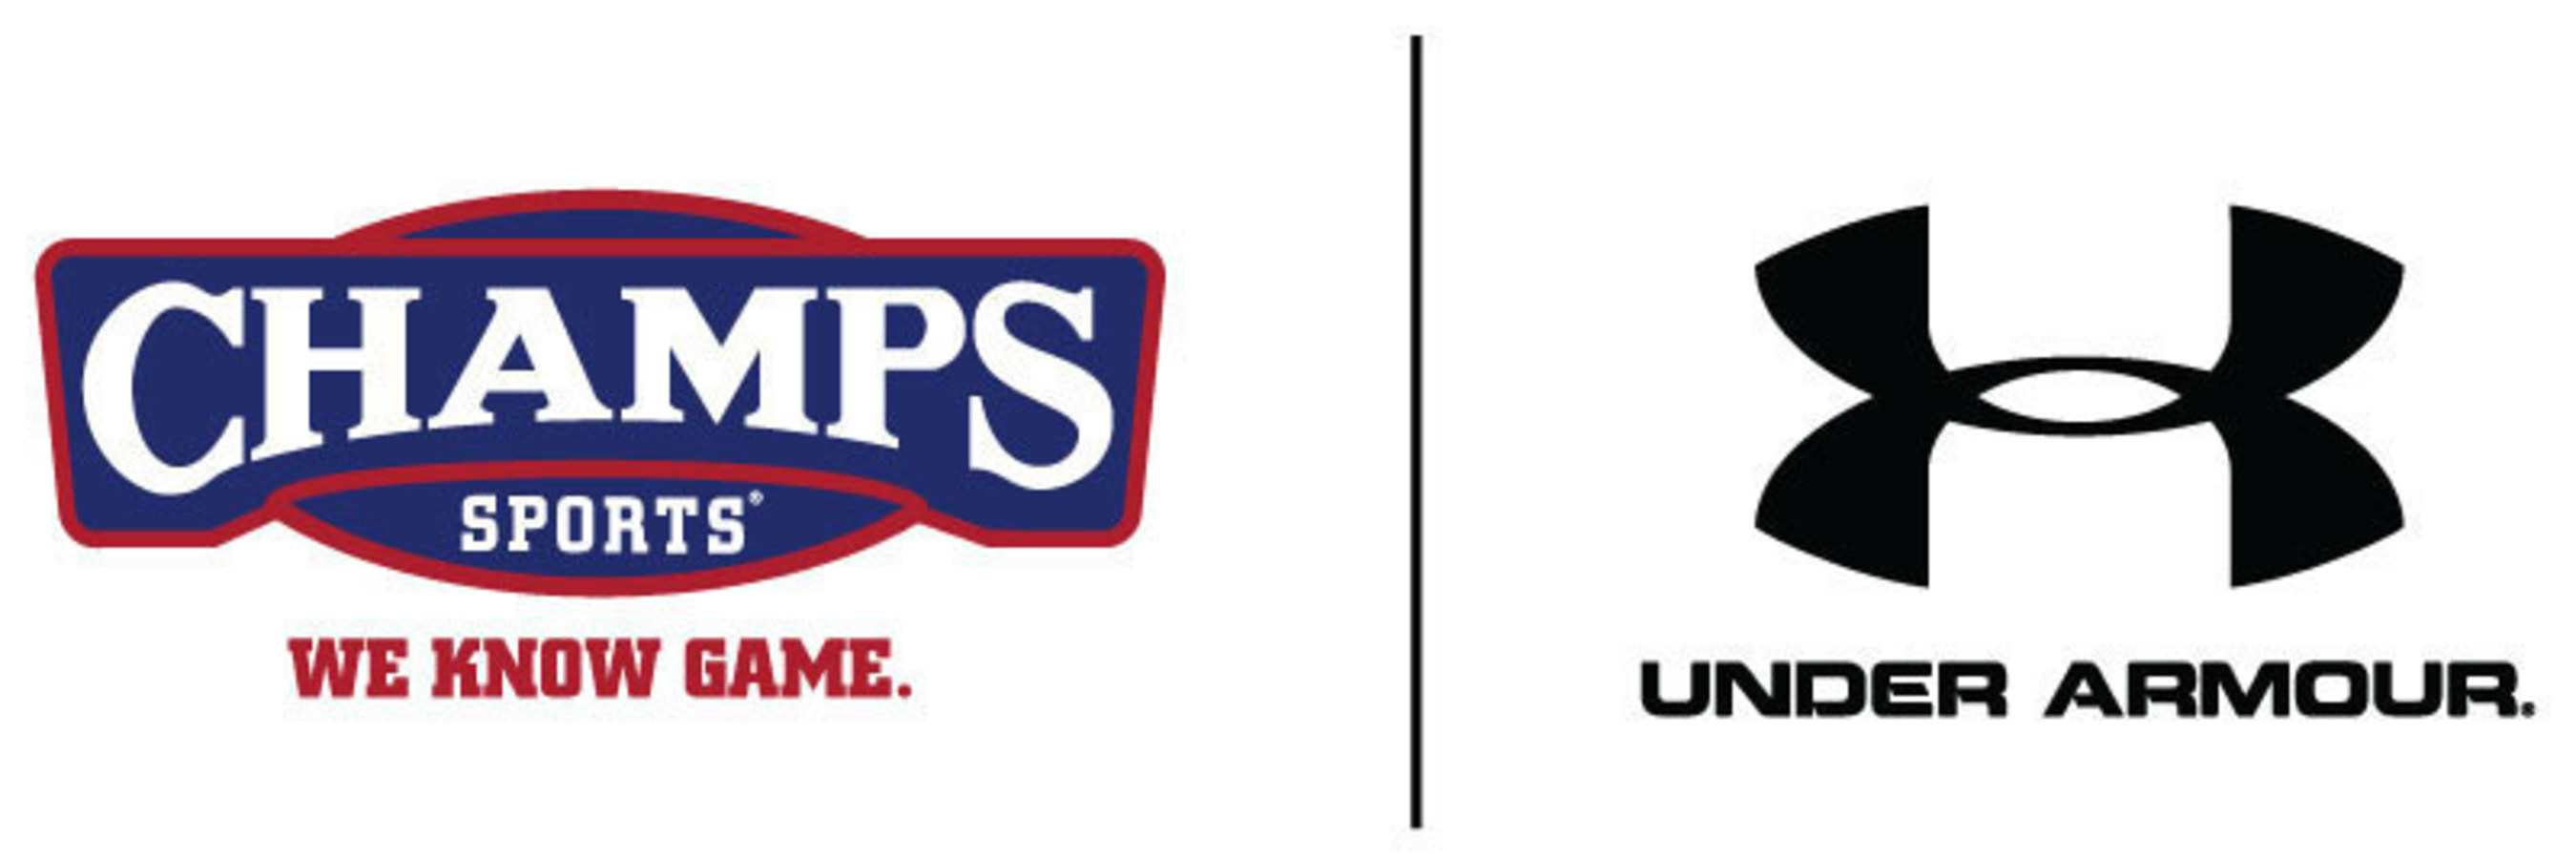 Champs Sports and Under Armour, Inc.